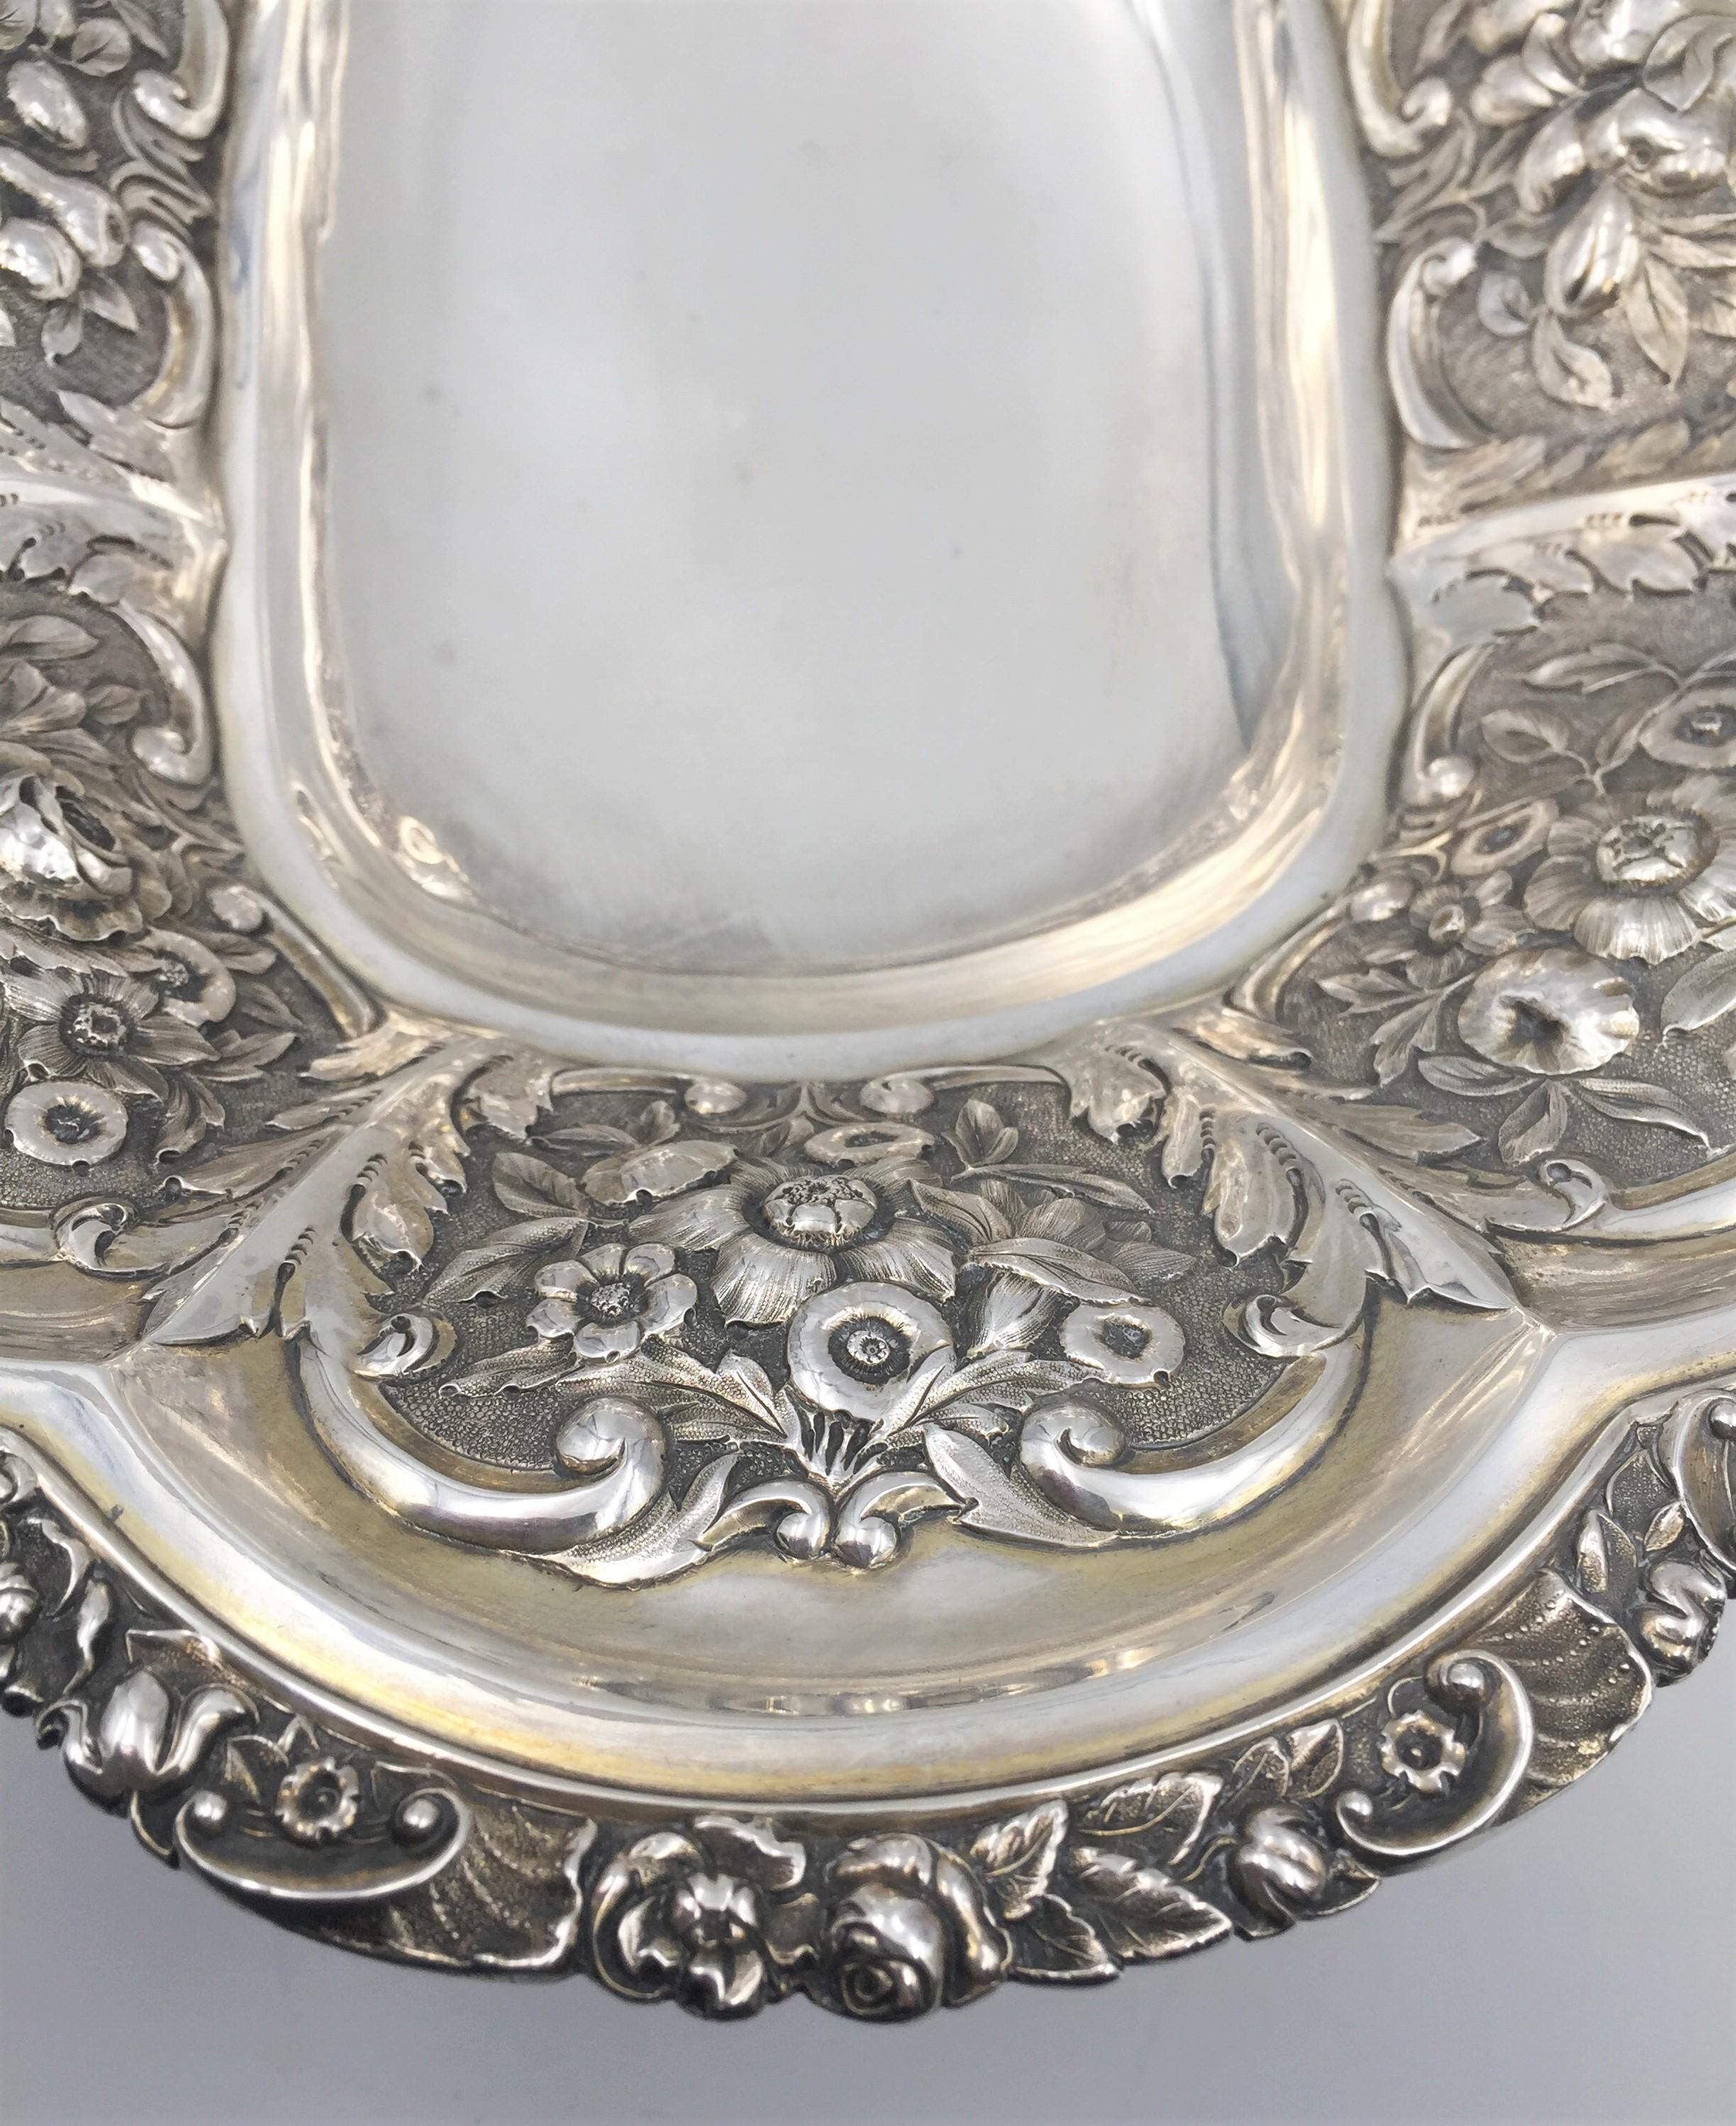 Sterling Silver Bridal Flower Basket Centerpiece Bowl by Henry Herbert 1823 In Good Condition For Sale In New York, NY